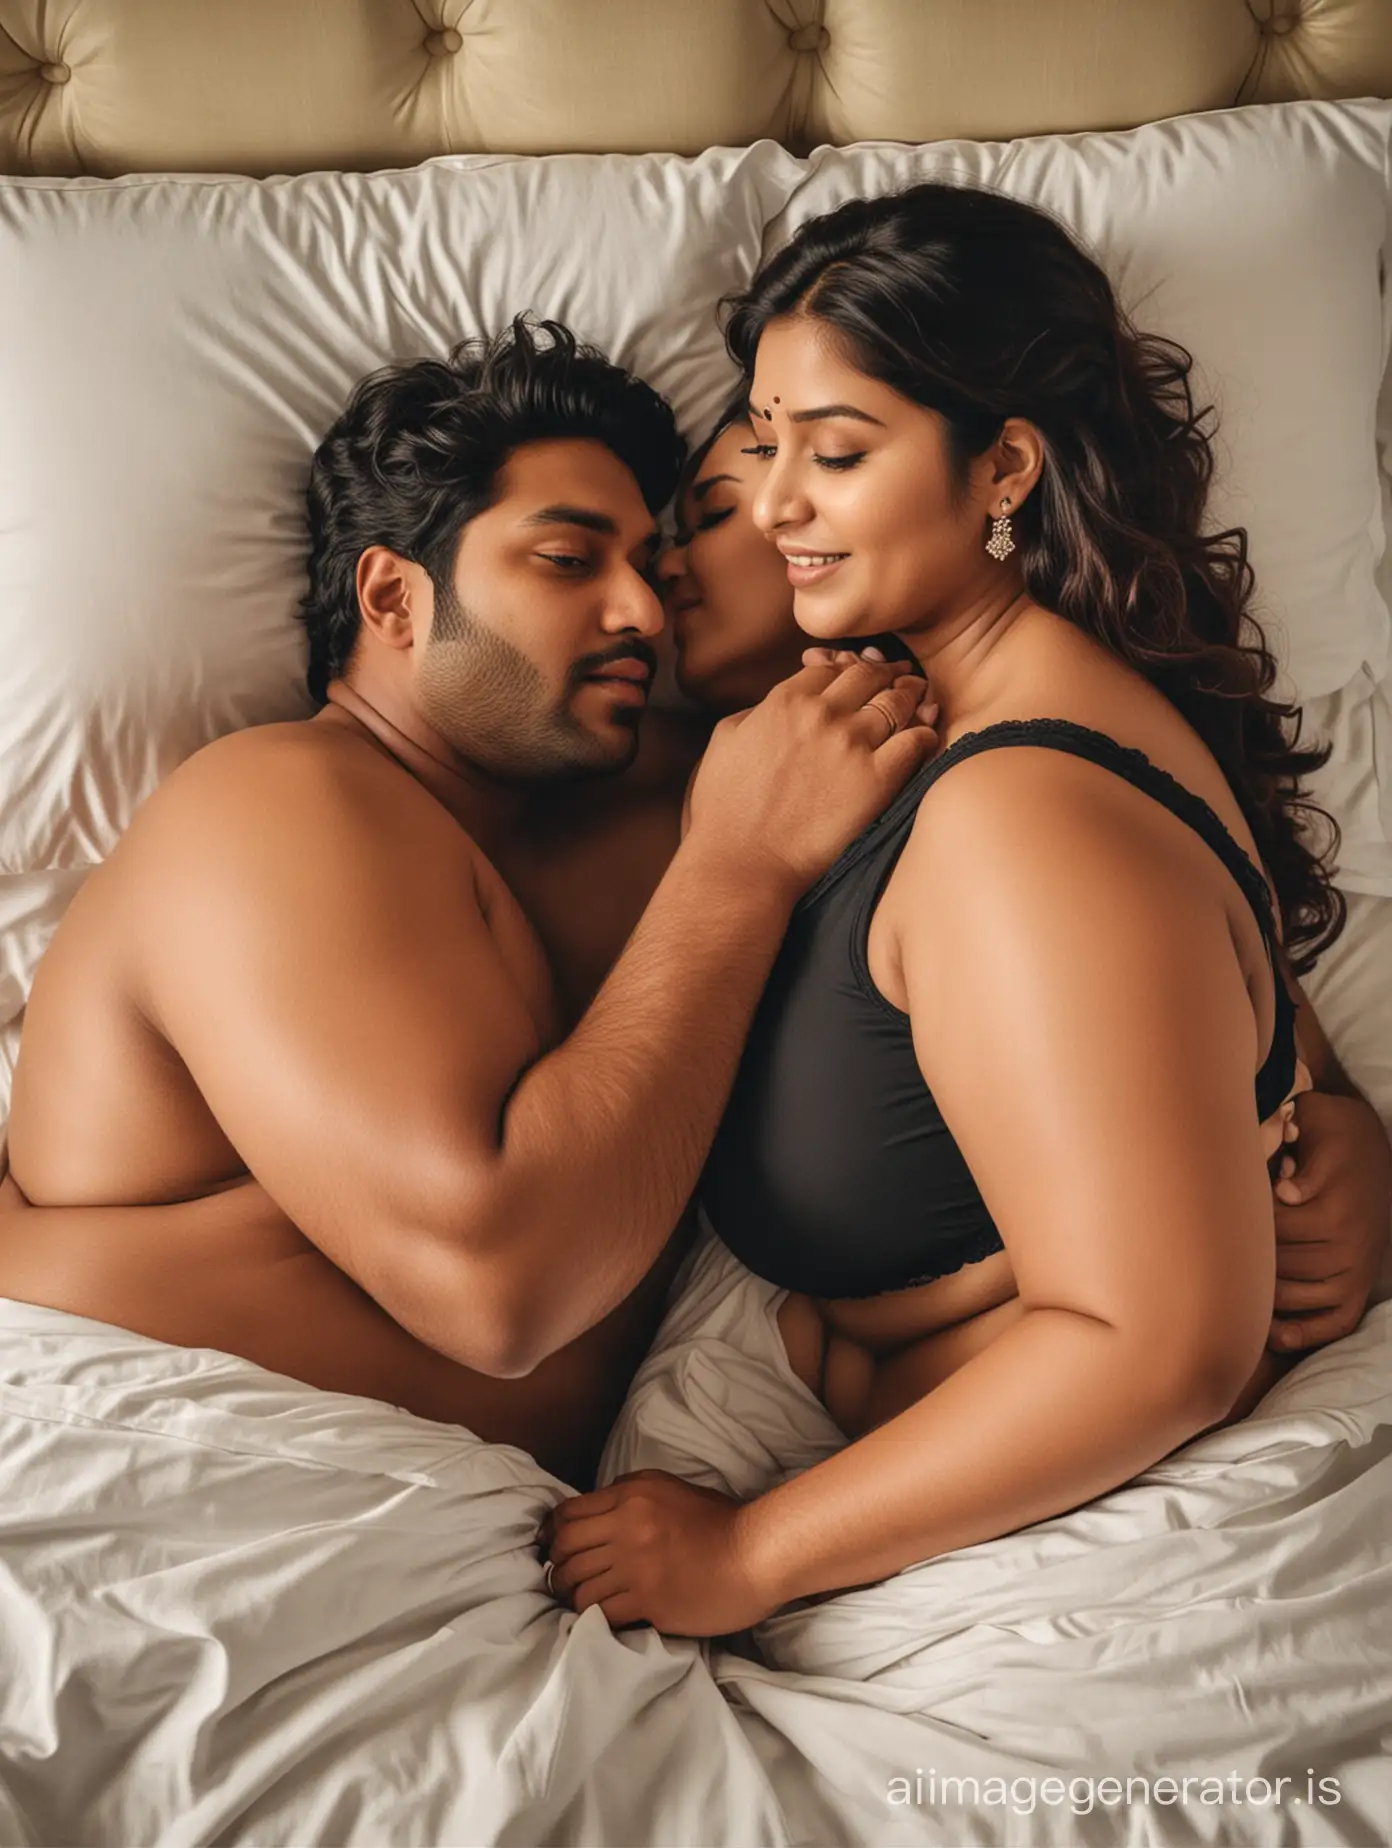 Only two people with Average Indian men and Indian women plus size  together in bed trying to seduce